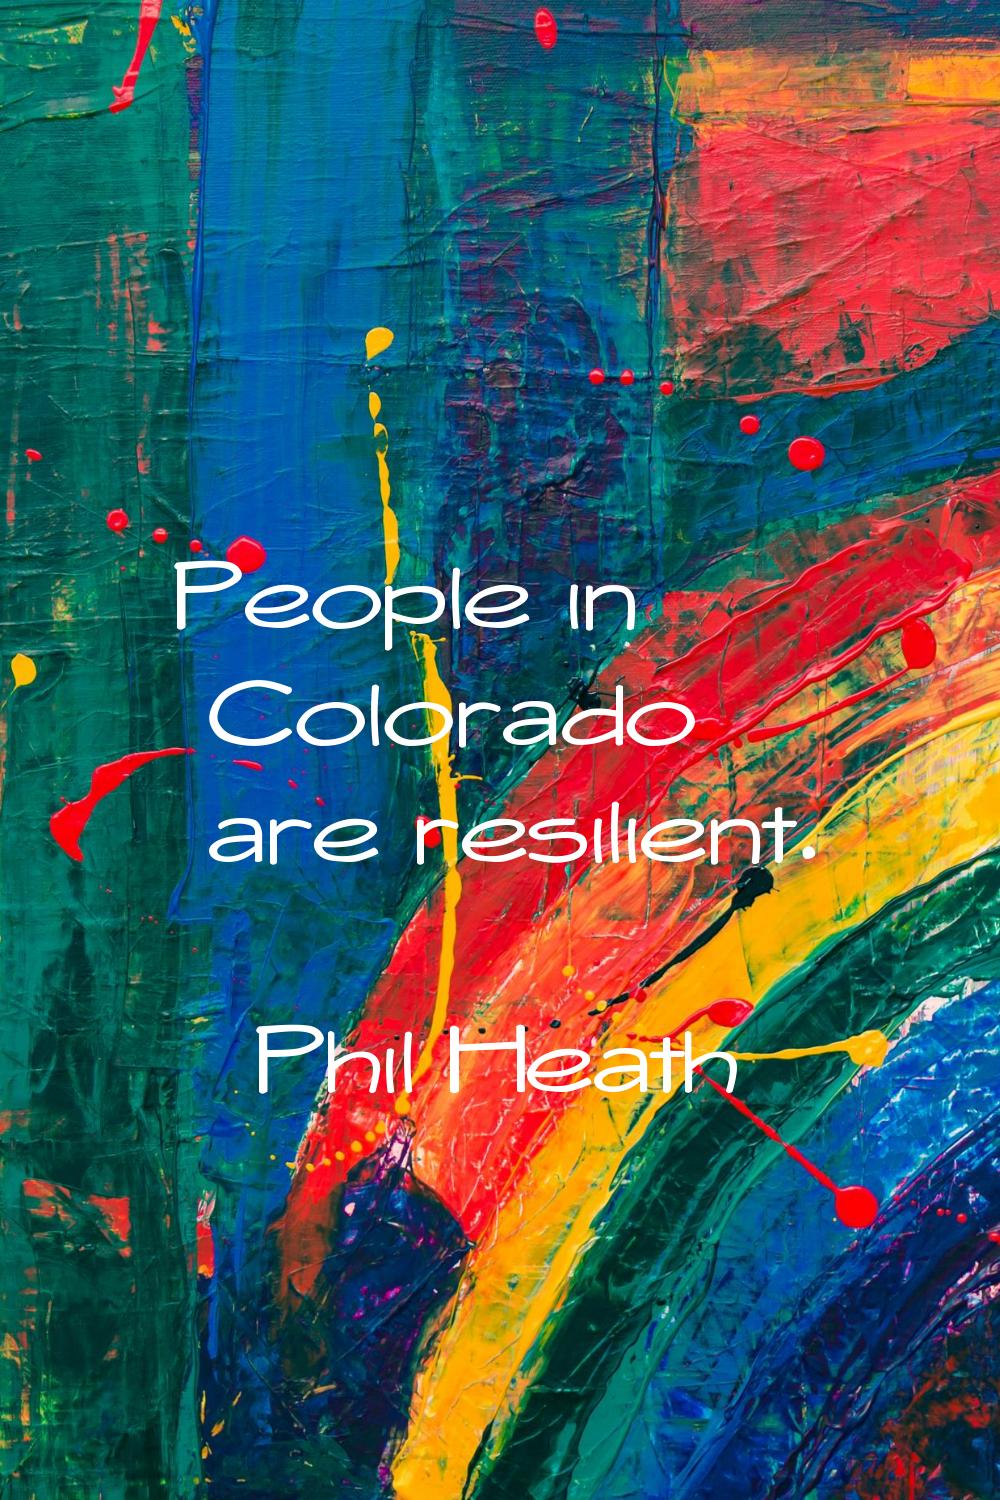 People in Colorado are resilient.